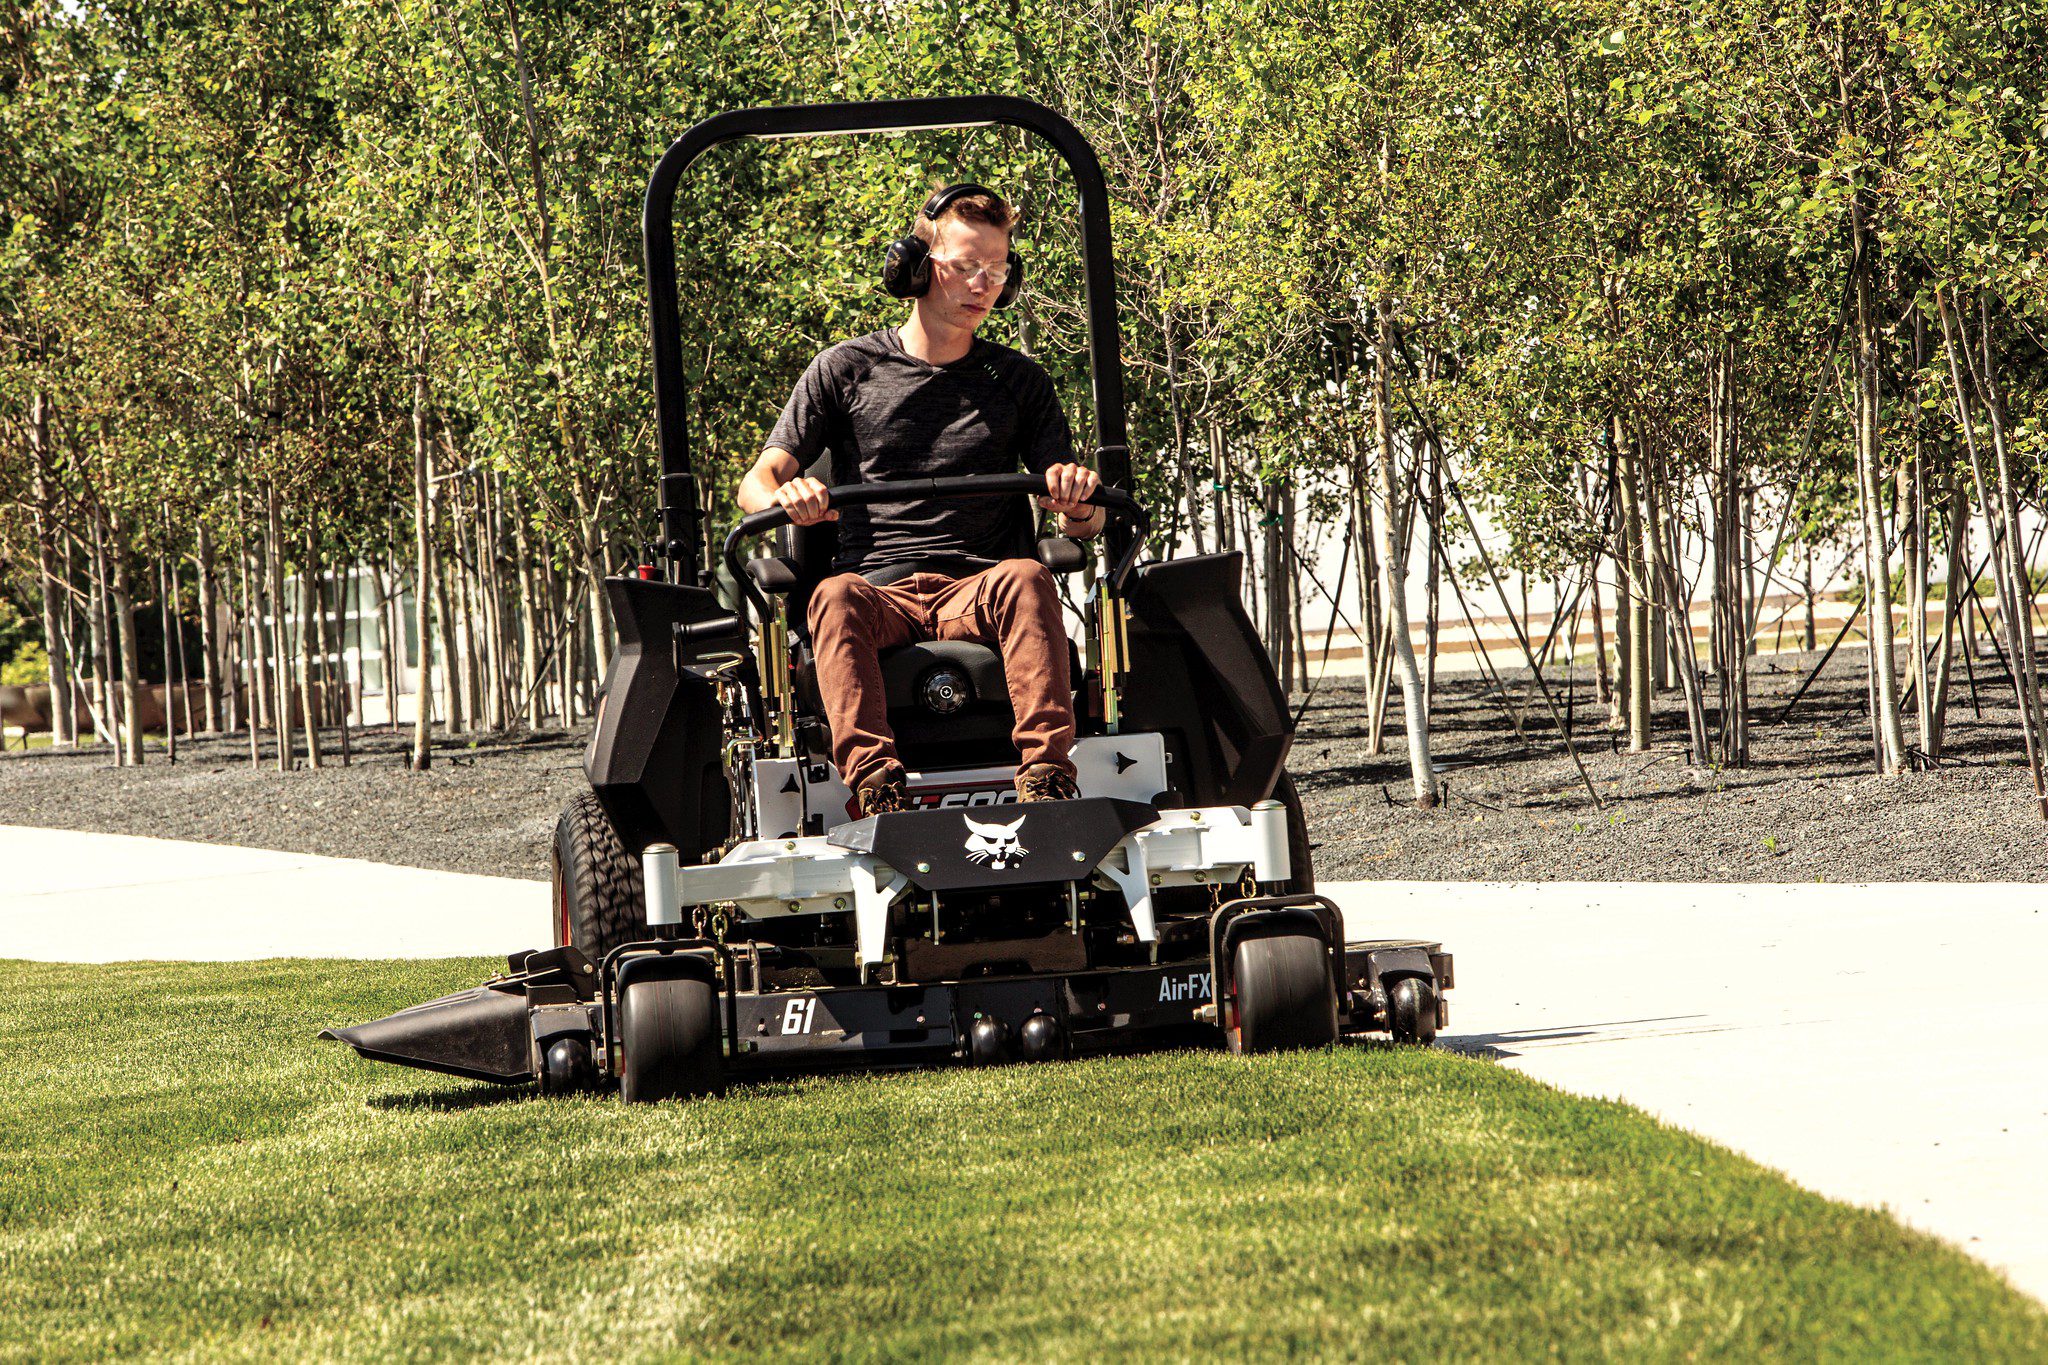 Browse Specs and more for the ZT6000 Zero-Turn Mower 52″ - White Star Machinery